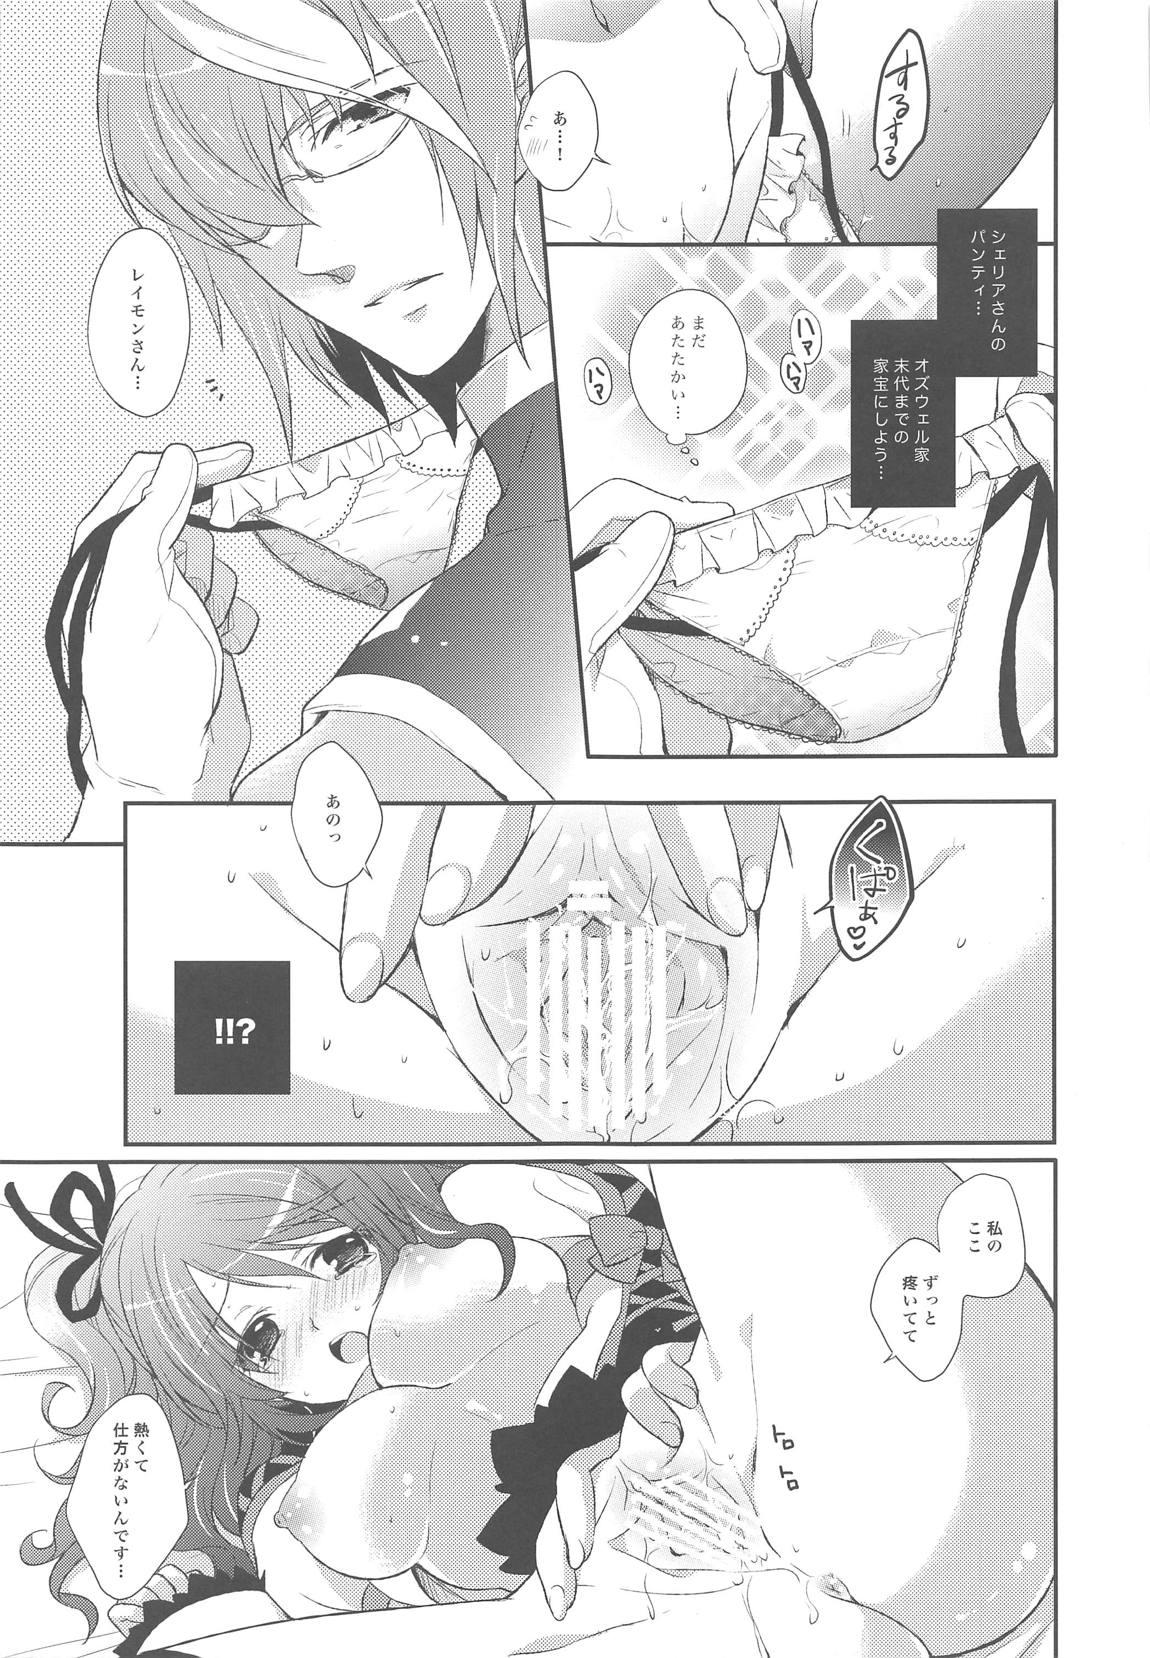 Licking Dualize My Angel - Tales of graces Chupada - Page 10